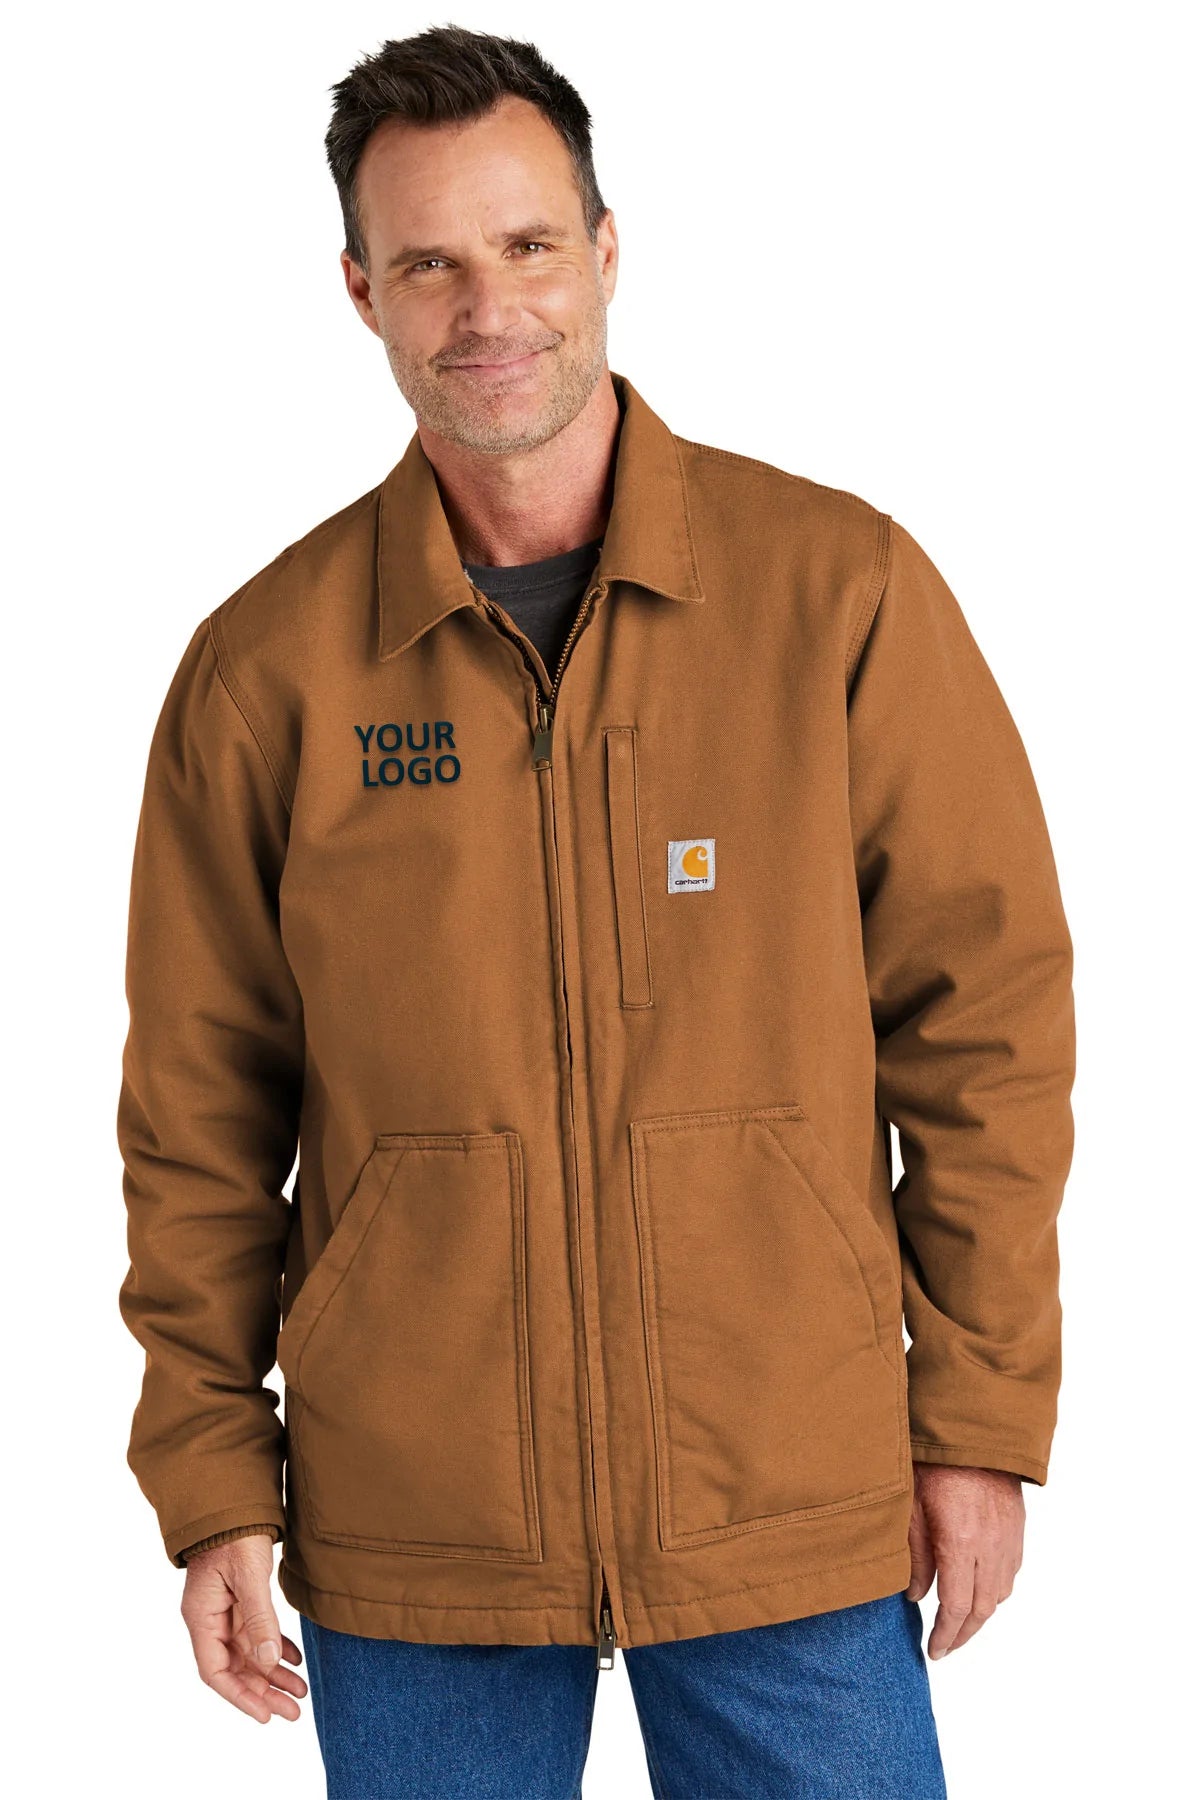 Carhartt CT104293 S Carhartt Brown CT104293 company jackets with logo